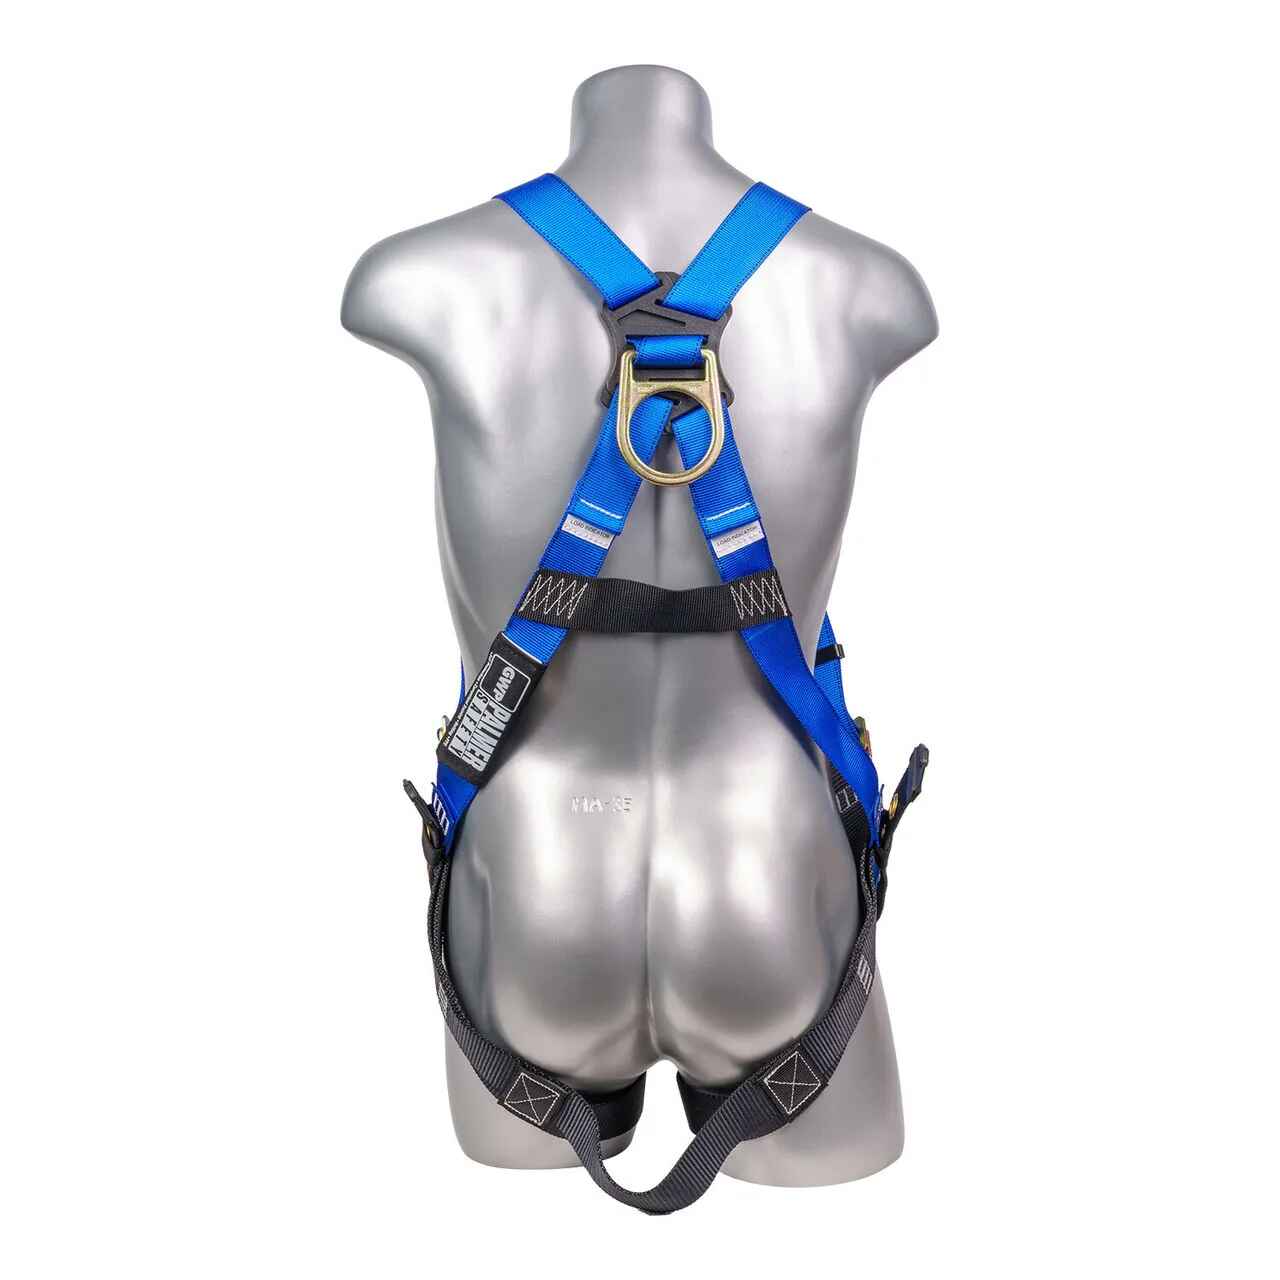 Construction Safety Harness 5 Point, Grommet Legs, Back D-Ring, Blue - Defender Safety